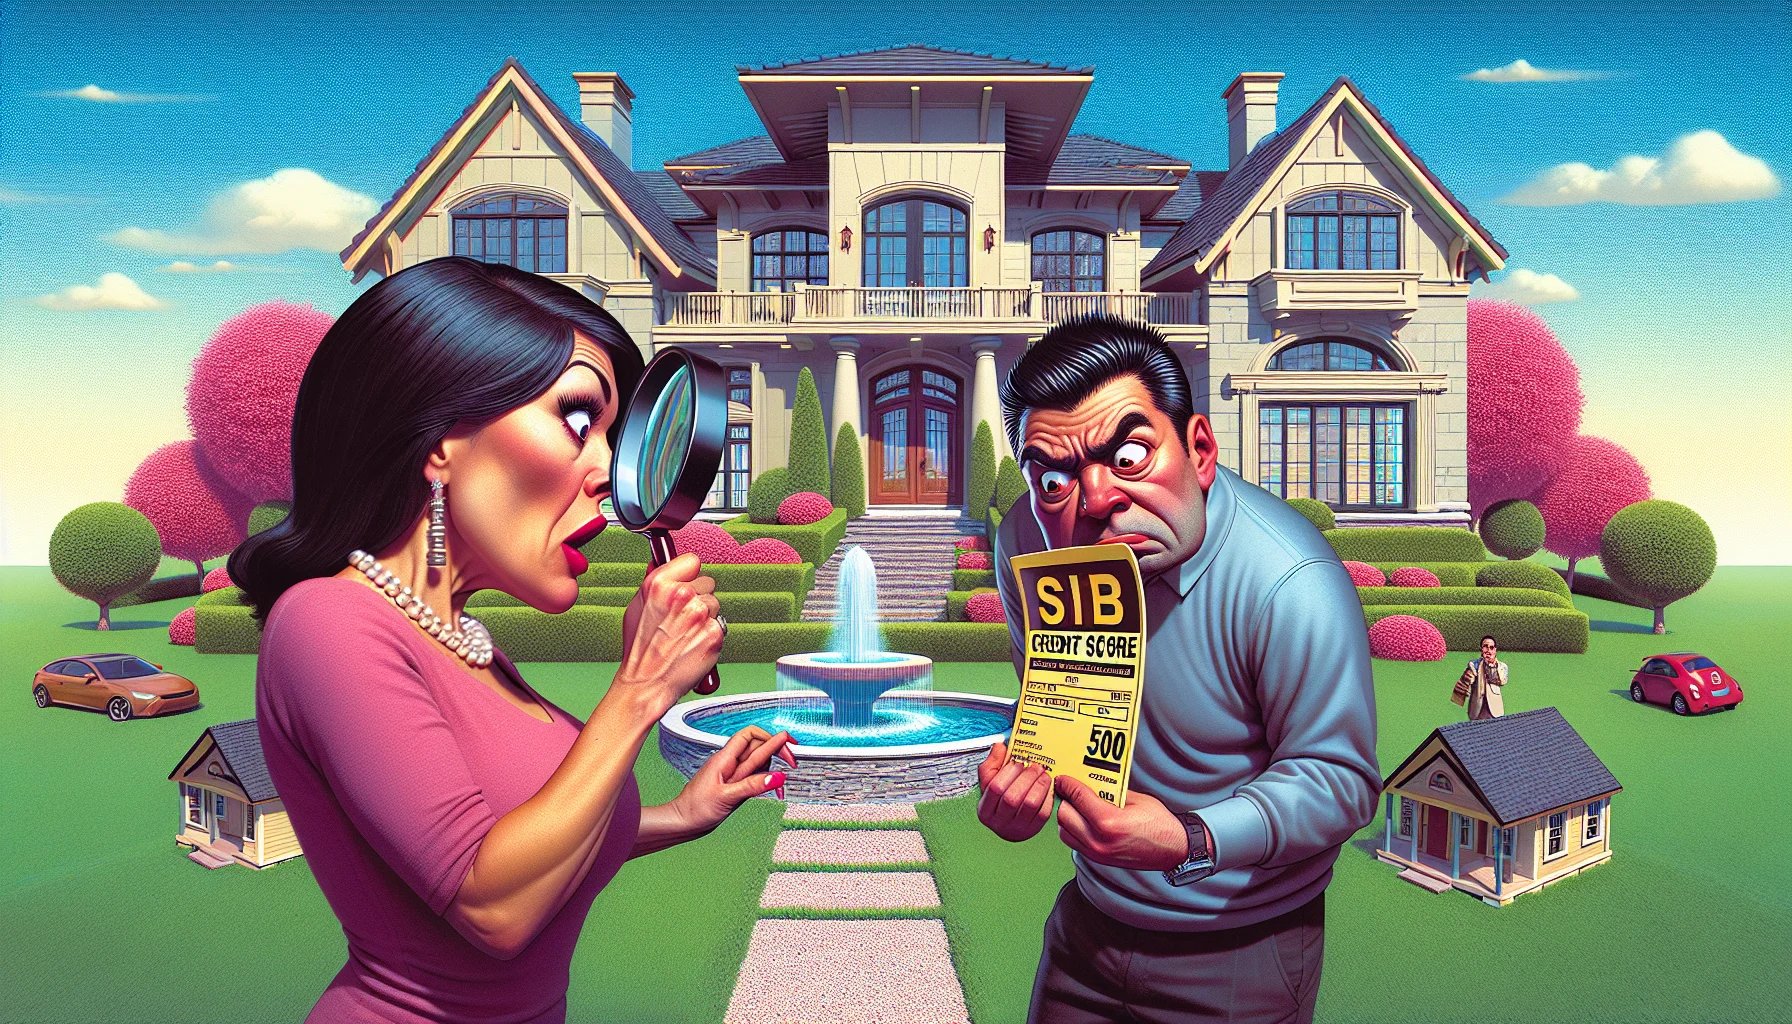 A visually humorous scenario shows a person attempting to buy an extravagant mansion with only a 500 credit score. The real estate agent, a middle-aged Hispanic woman with a hard-to-believe expression on her face, pulls out a magnifying glass to examine the buyer's credit report closely. The buyer, a South Asian man in his 30s smirk at his bravery. The luxurious mansion stands in the background, surrounded by manicured lawns and elaborate water fountains. A trio of tiny houses sits on the edge of the image, humorously displayed as 'affordable options'. The image is vibrant and vibrant, with a touch of realism and humor.